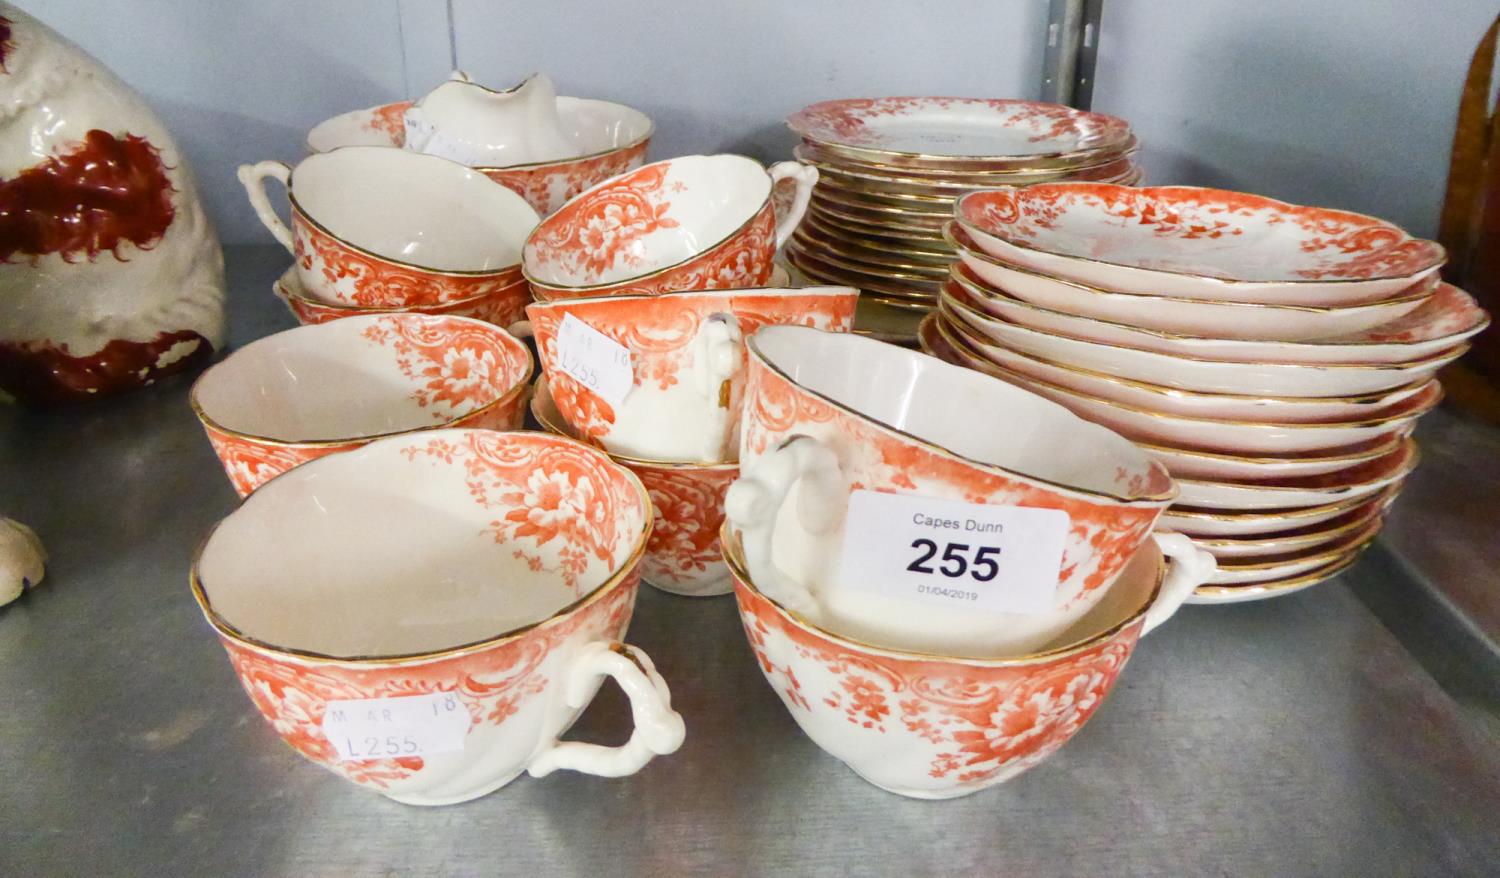 A 38 PIECE LATE VICTORIAN PORCELAIN TEA SERVICE, TRANSFER PRINTED IN BRICK RED (38)